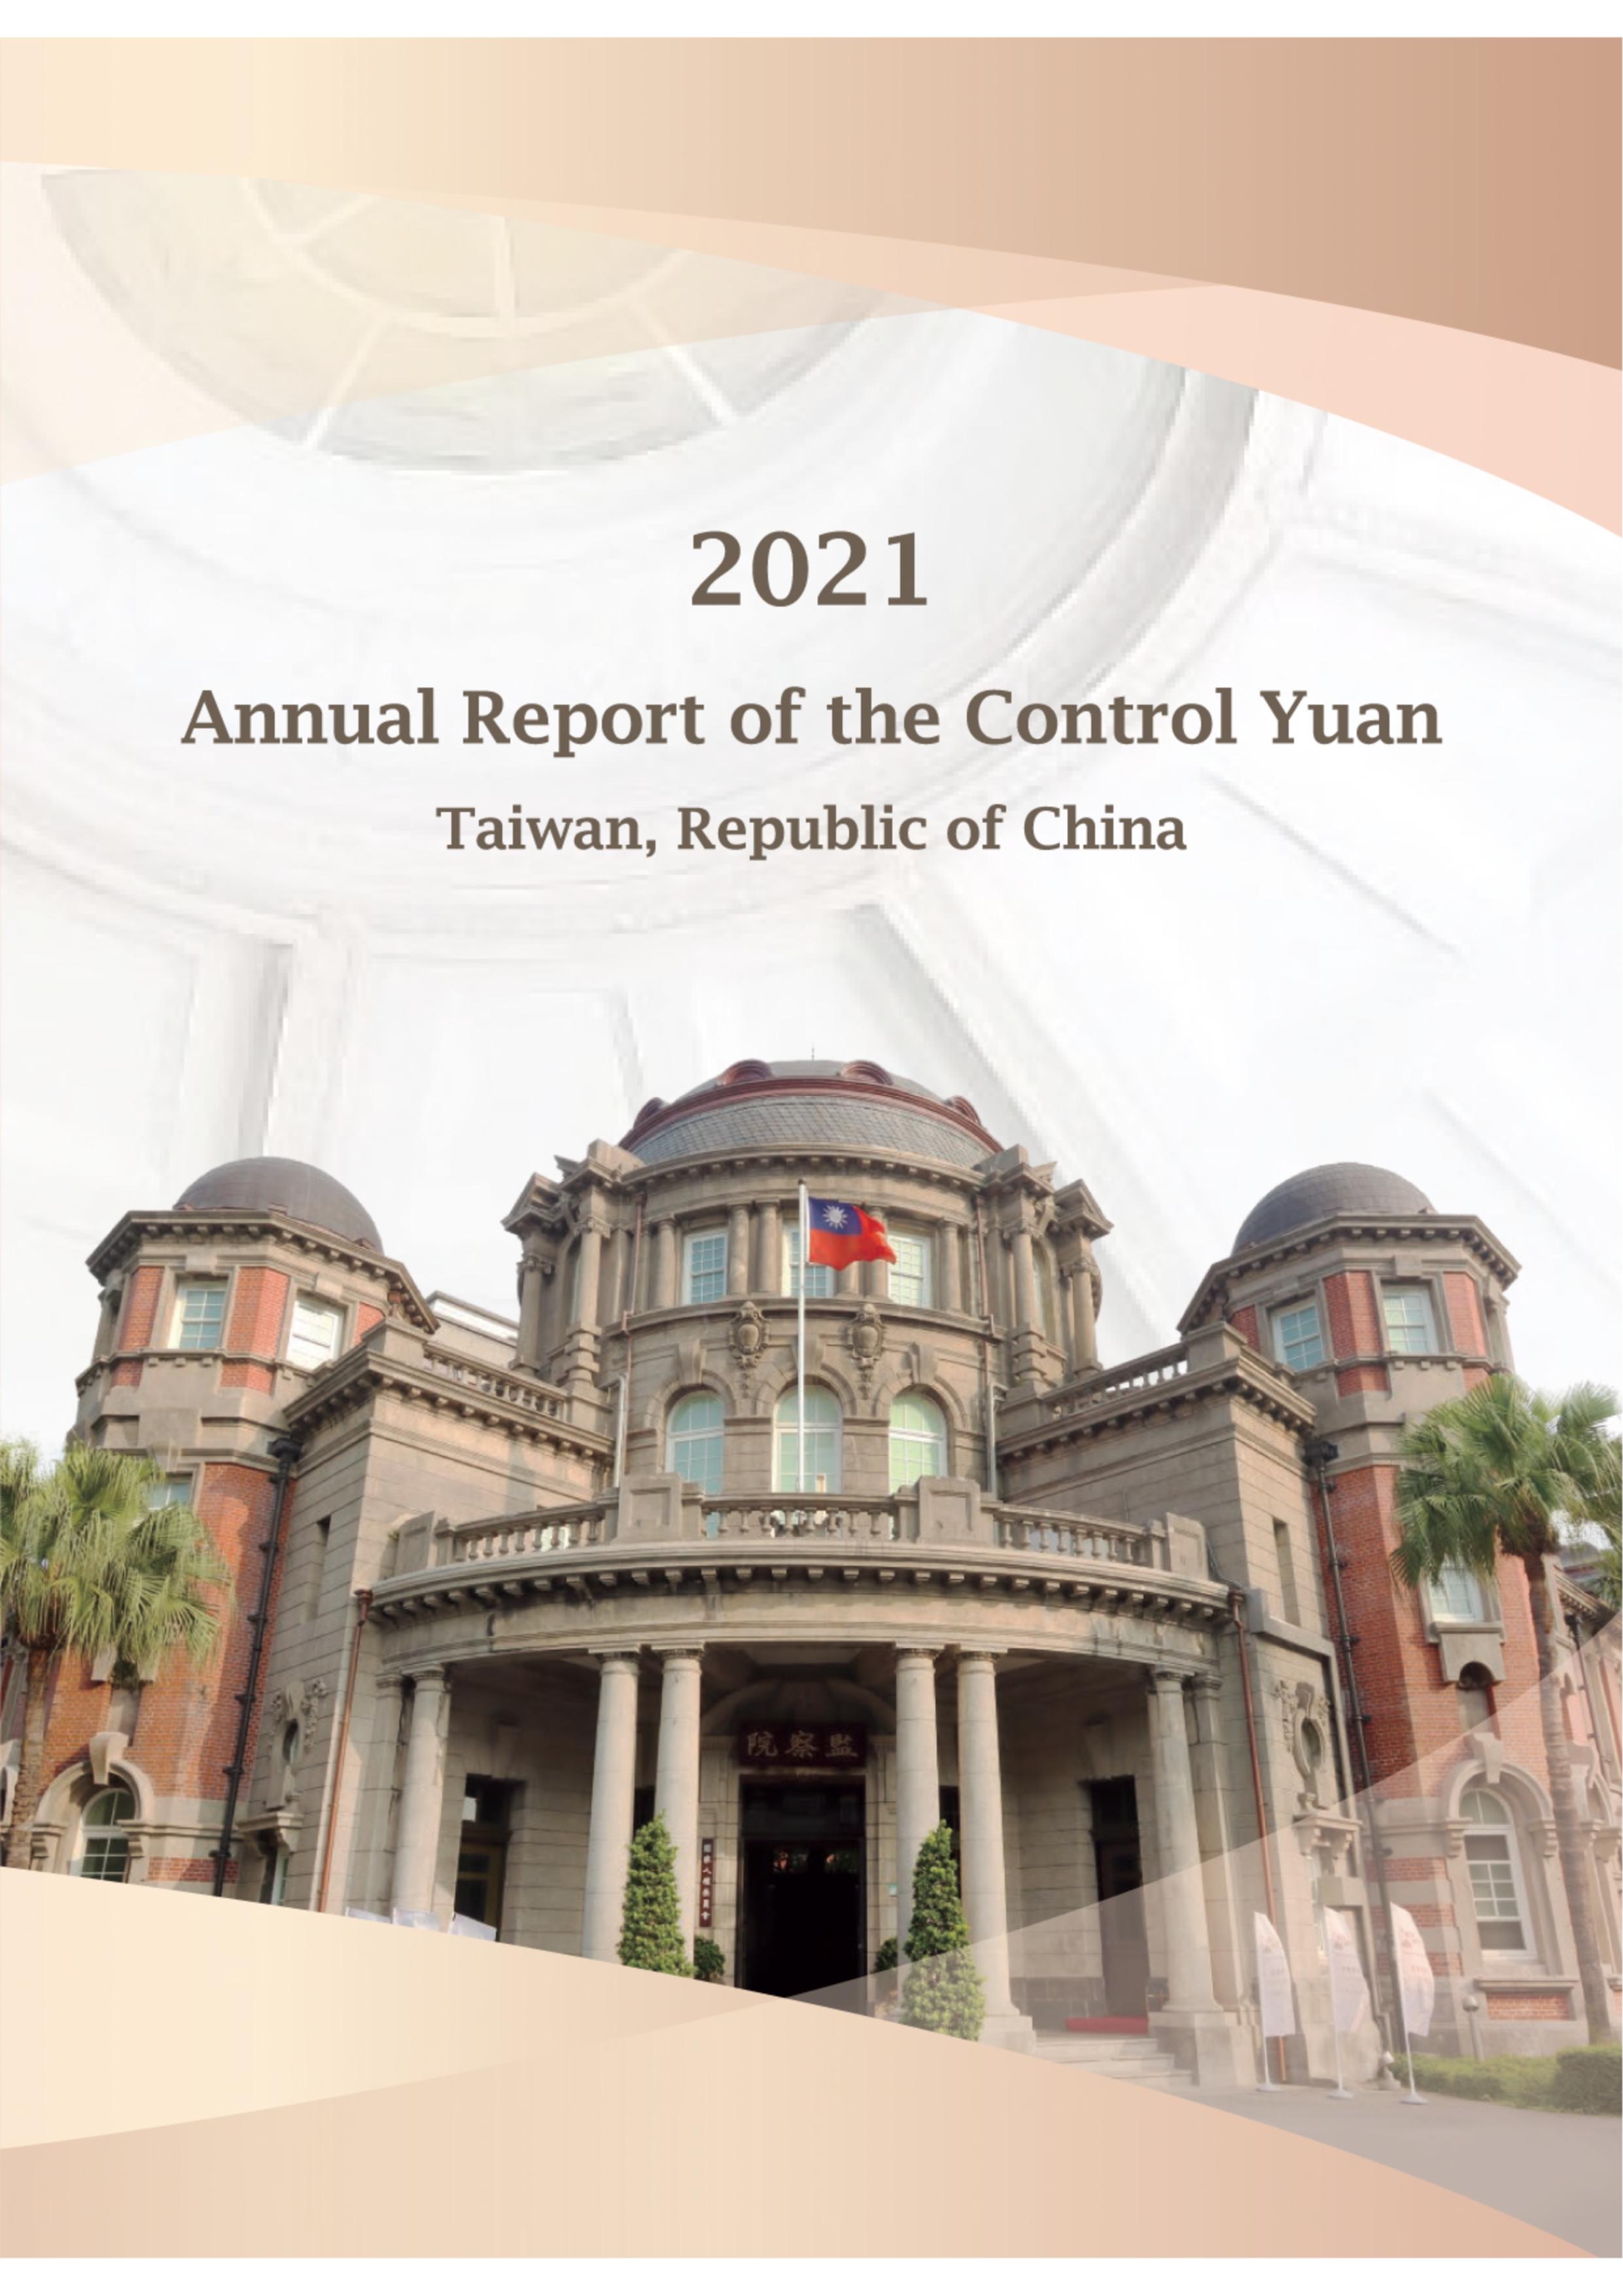 Annual Report of the Control Yuan, 2021